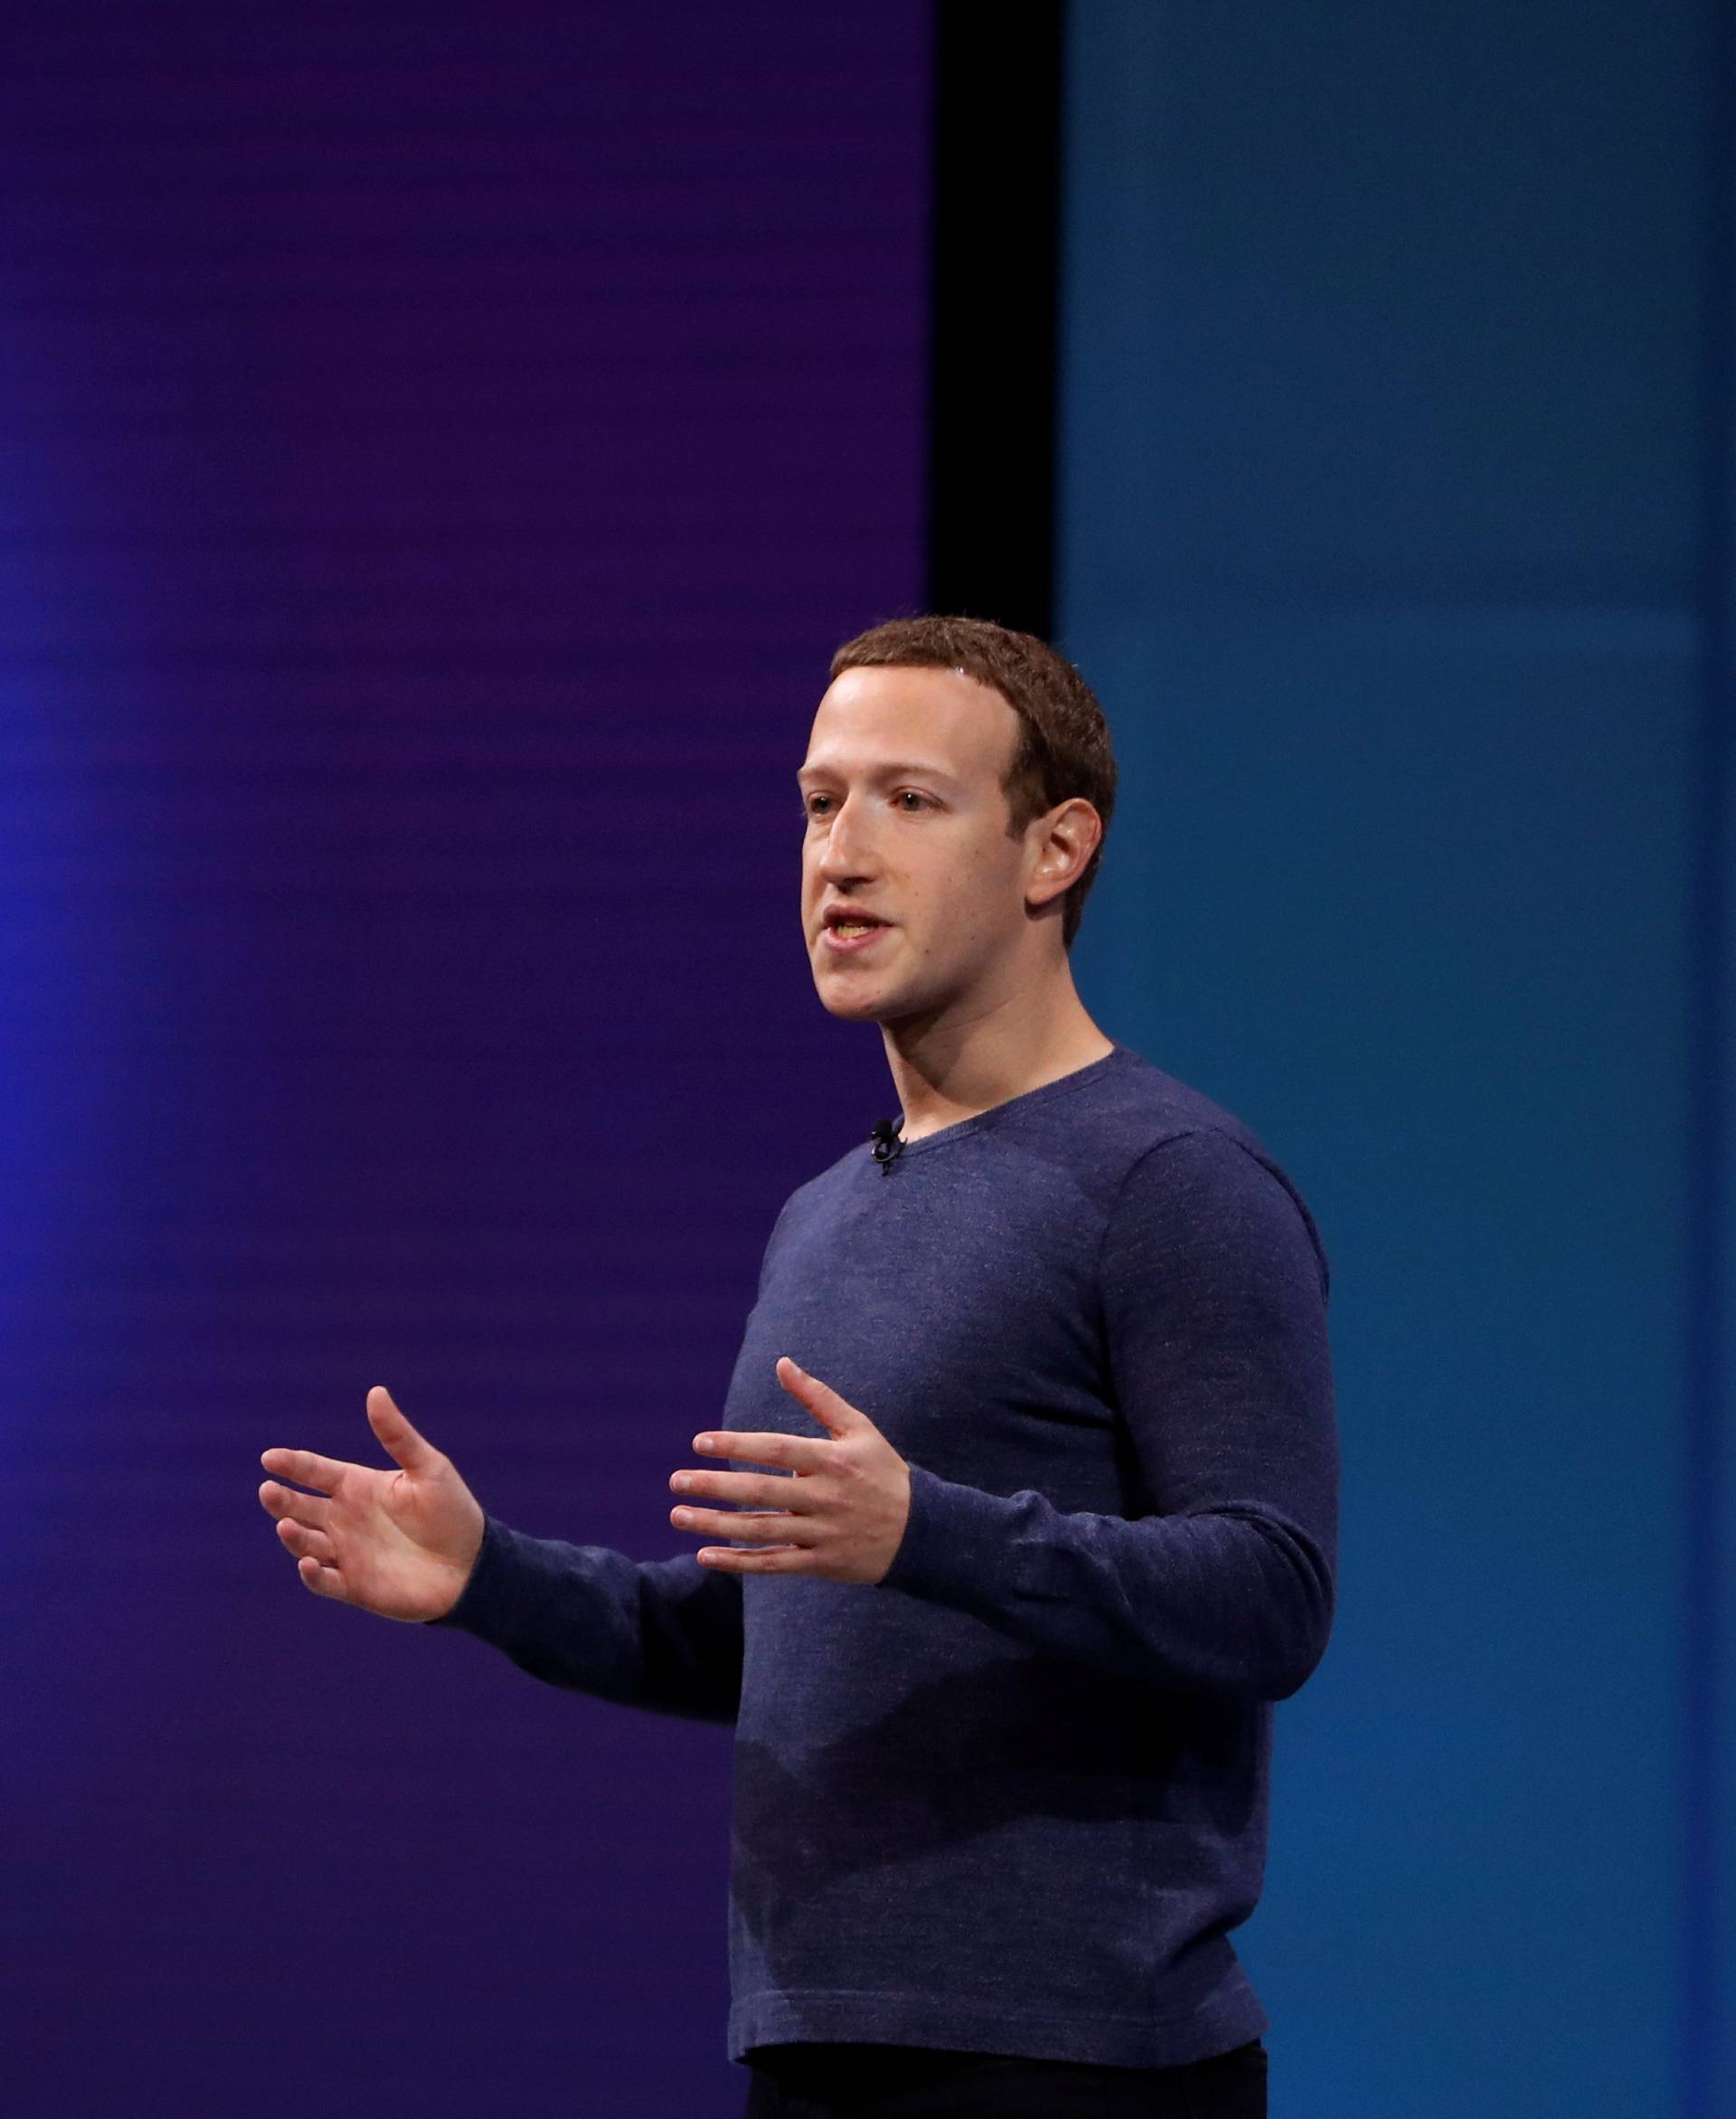 FILE PHOTO: Facebook CEO Mark Zuckerberg speaks at Facebook Inc's annual F8 developers conference in San Jose